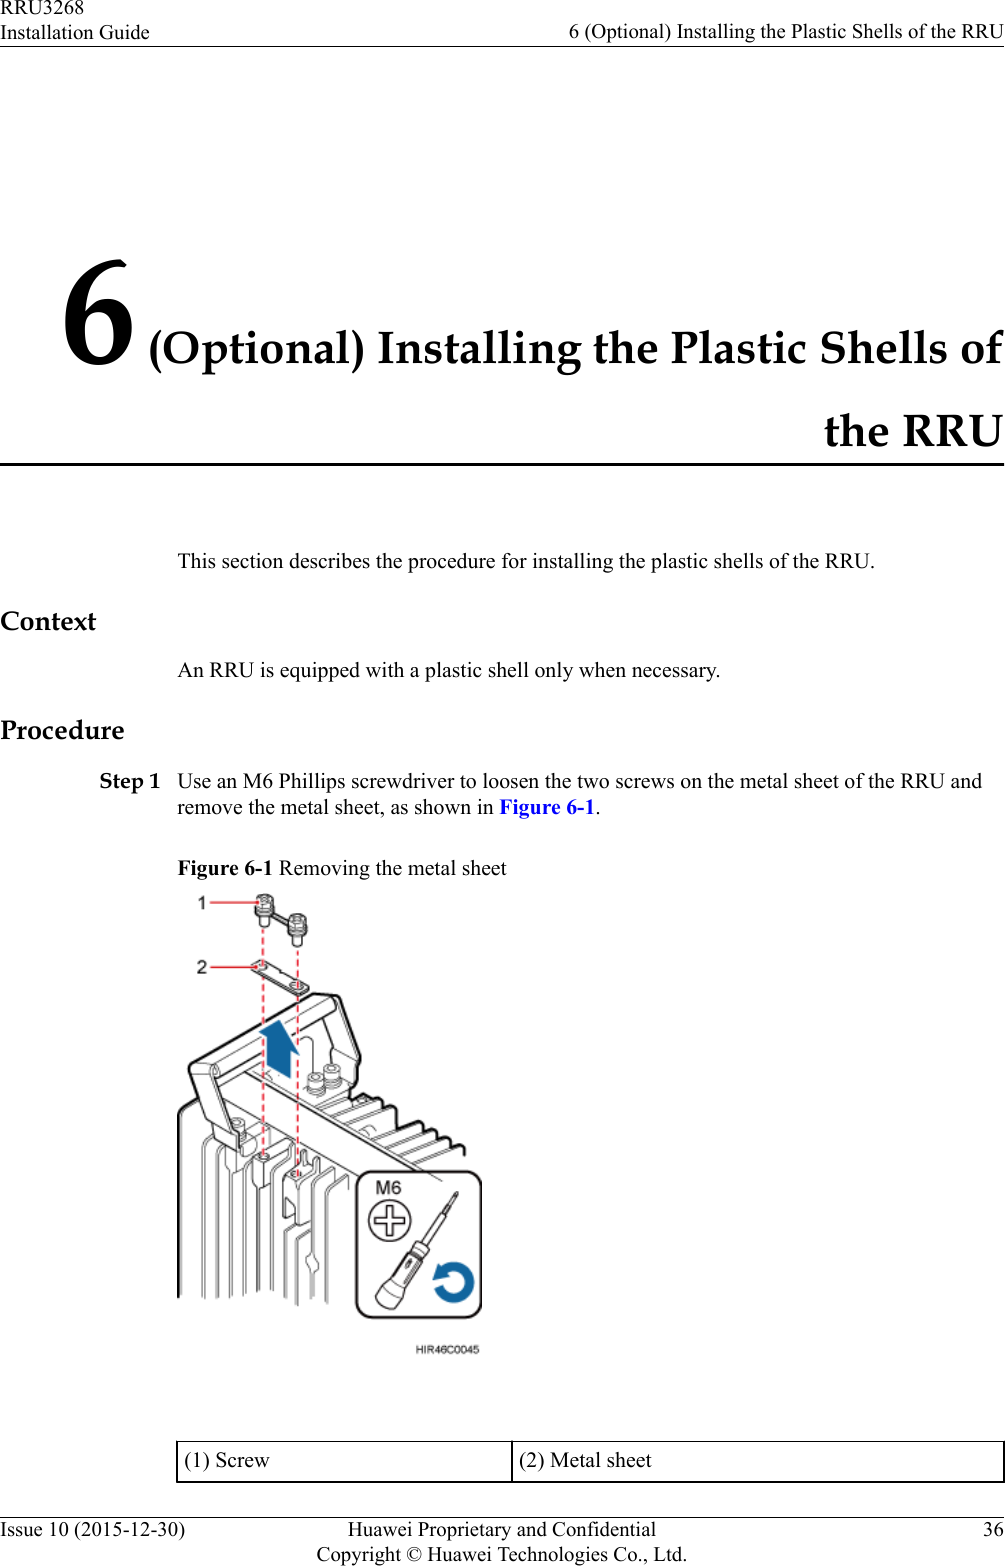 6 (Optional) Installing the Plastic Shells ofthe RRUThis section describes the procedure for installing the plastic shells of the RRU.ContextAn RRU is equipped with a plastic shell only when necessary.ProcedureStep 1 Use an M6 Phillips screwdriver to loosen the two screws on the metal sheet of the RRU andremove the metal sheet, as shown in Figure 6-1.Figure 6-1 Removing the metal sheet (1) Screw (2) Metal sheetRRU3268Installation Guide 6 (Optional) Installing the Plastic Shells of the RRUIssue 10 (2015-12-30) Huawei Proprietary and ConfidentialCopyright © Huawei Technologies Co., Ltd.36